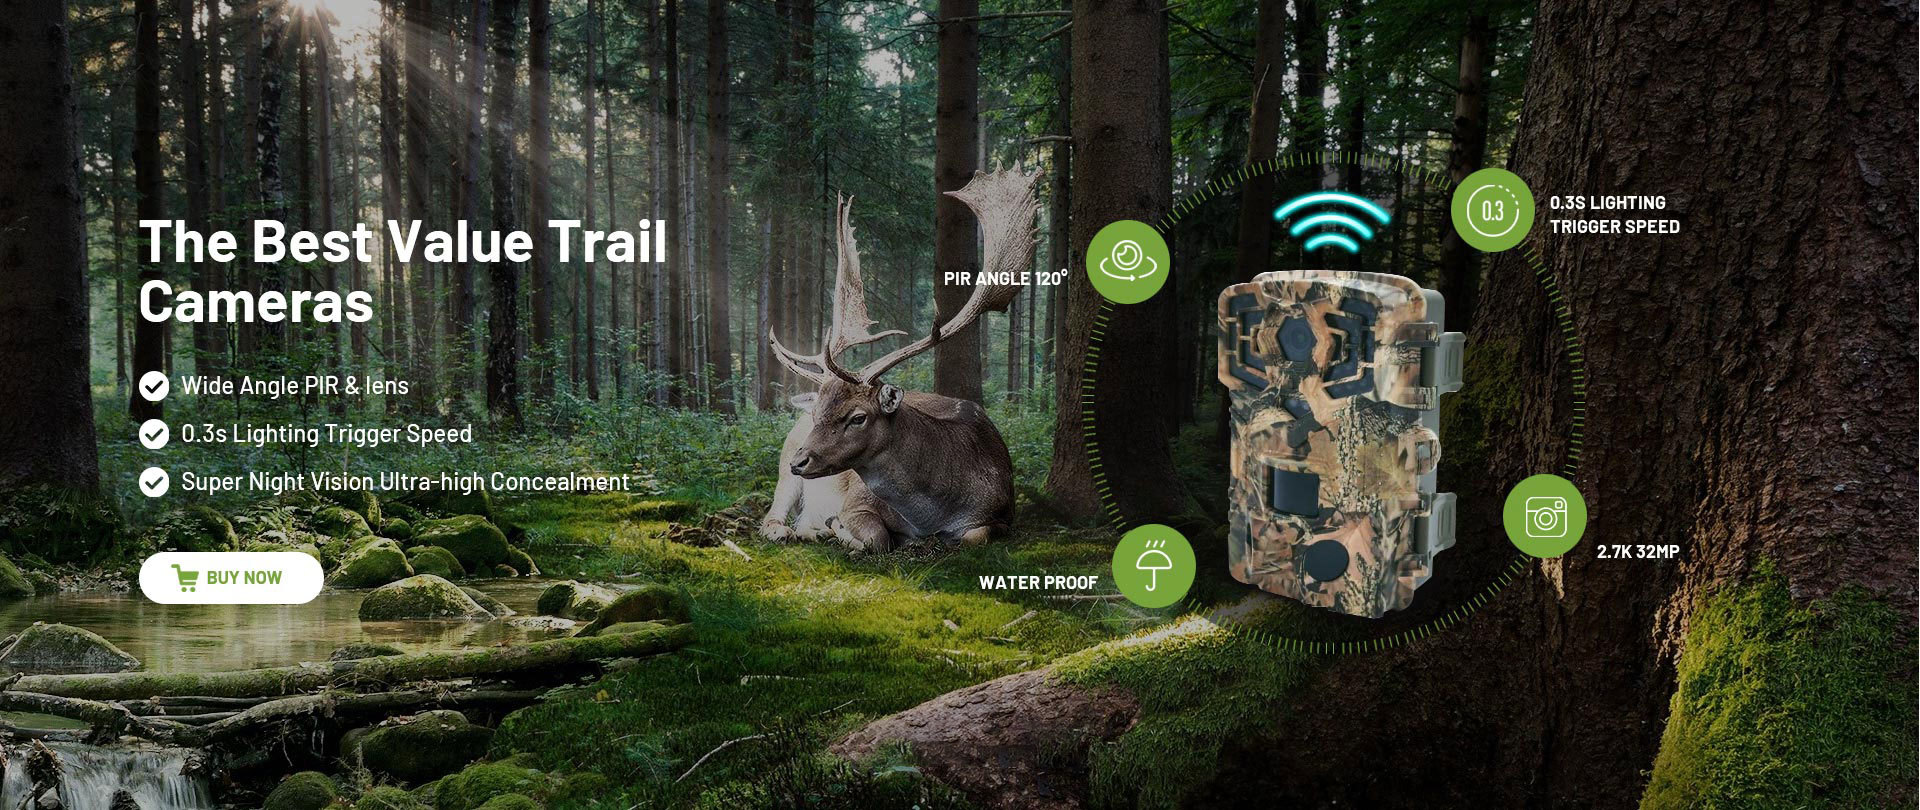 The Best Value TrailCameras